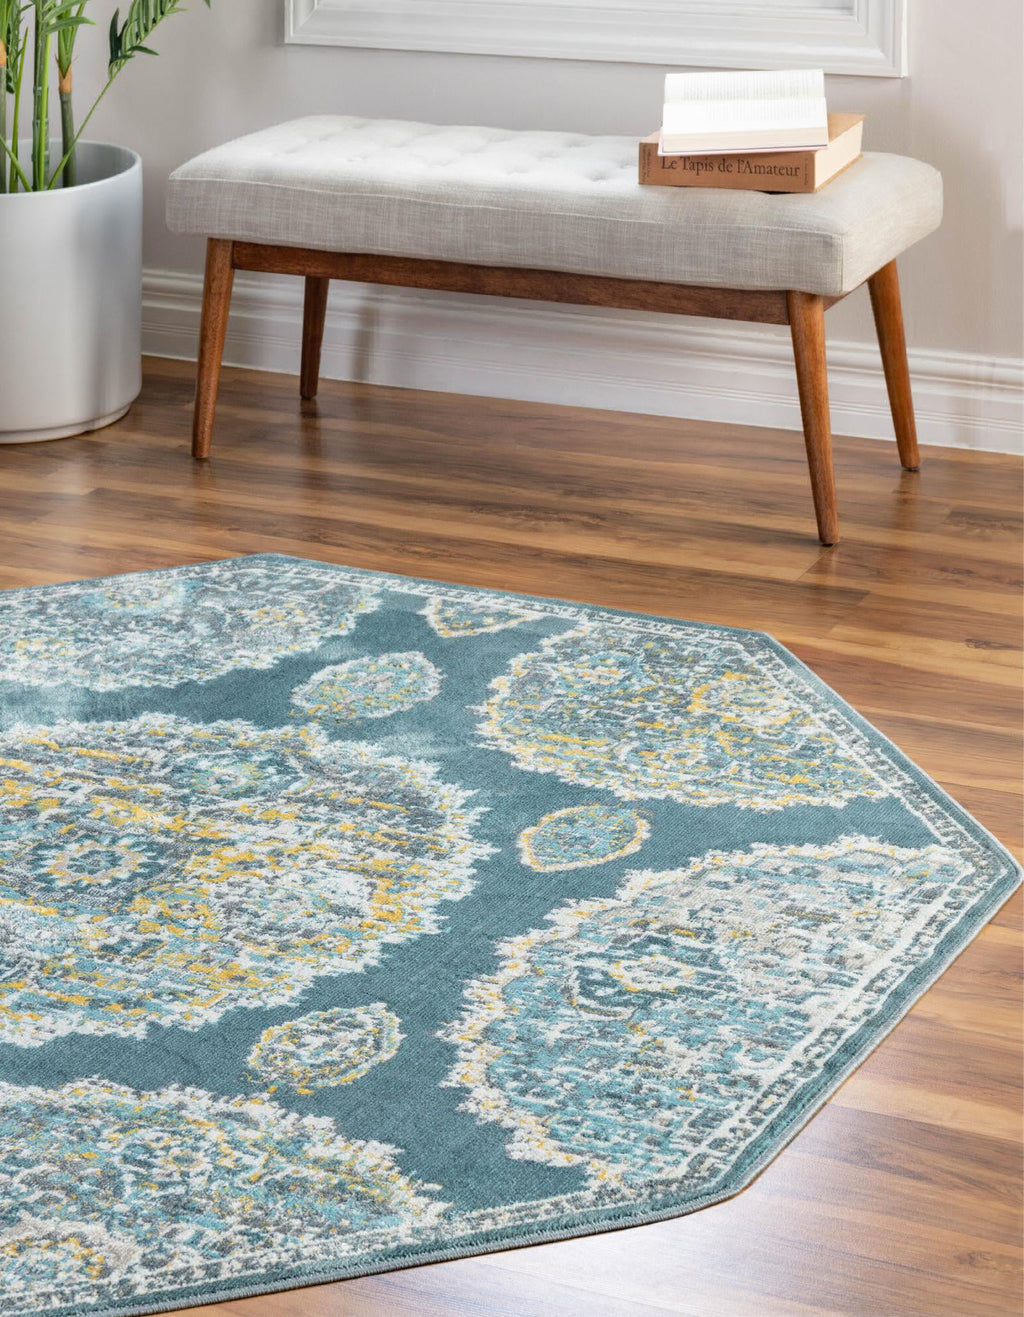 Unique Loom Paragon T-PRGN9 Gray and Blue Area Rug Octagon Lifestyle Image Feature